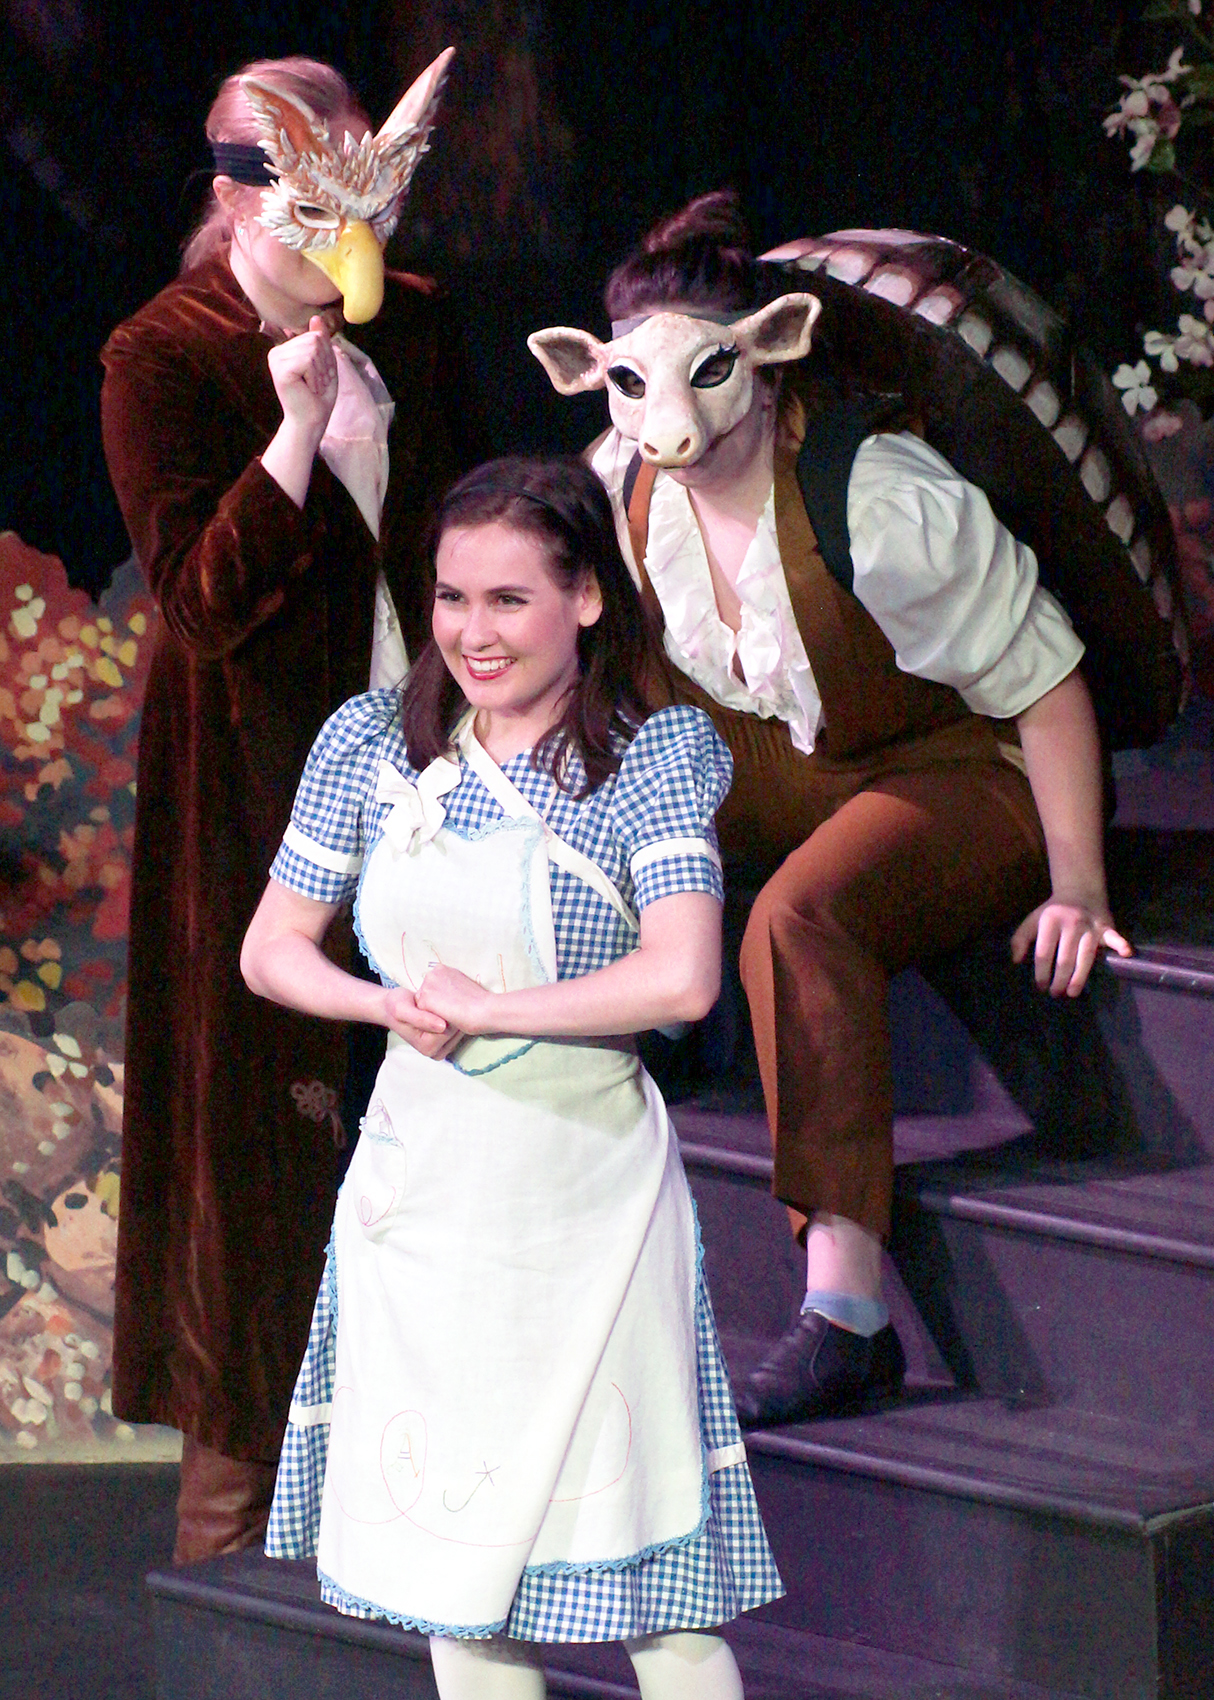 Performance of "Alice in Wonderland" at the Matthews Opera House in Spearfish, South Dakota. One smiling person wearing an apron over a blue checkered dress stands with hands held together. Behind them there are two people leaning in and wearing animal masks.